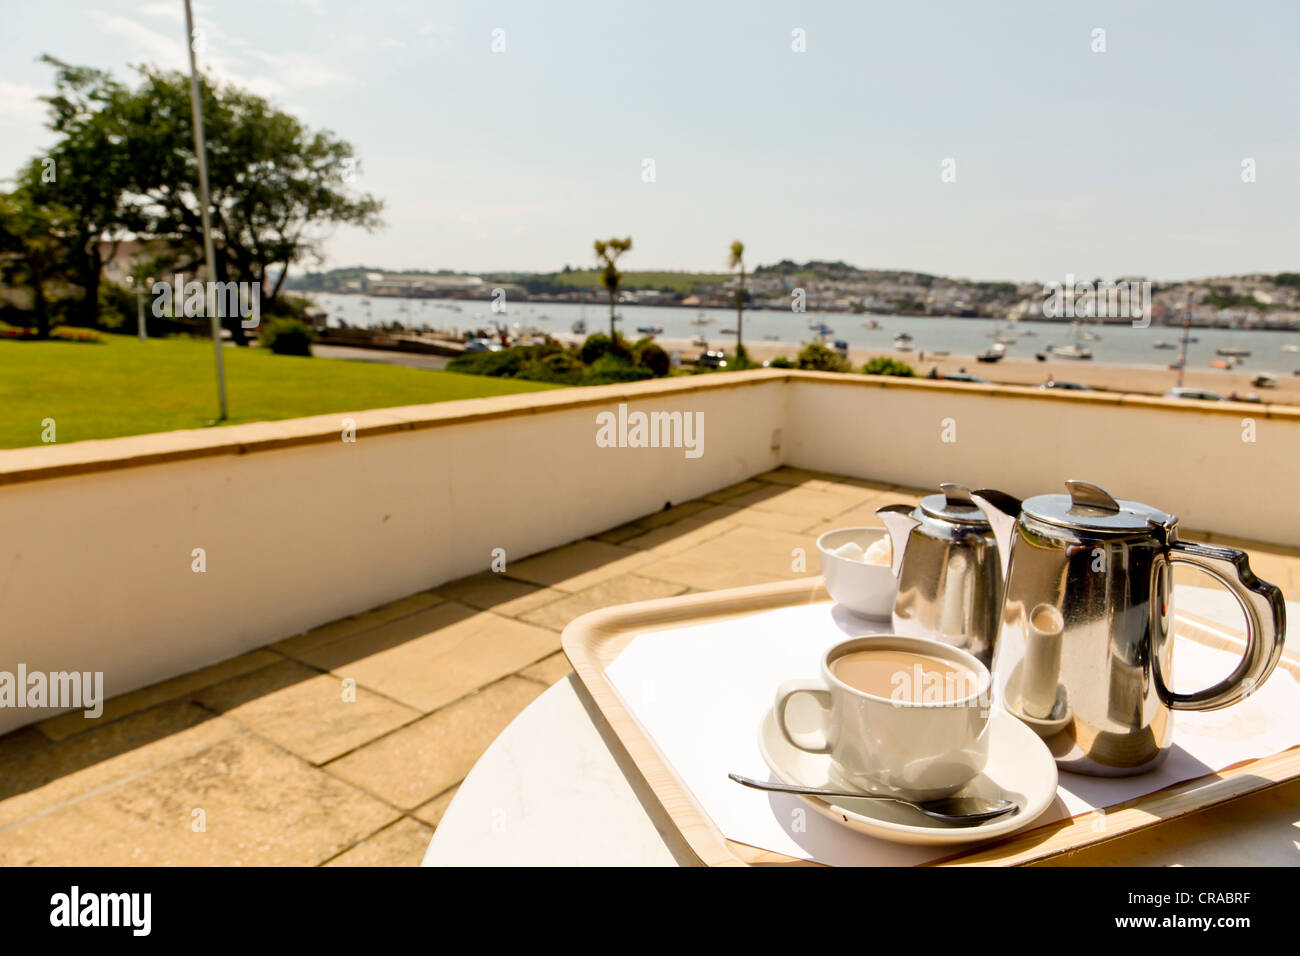 A traditional British or English tea set with a seaside setting Stock Photo